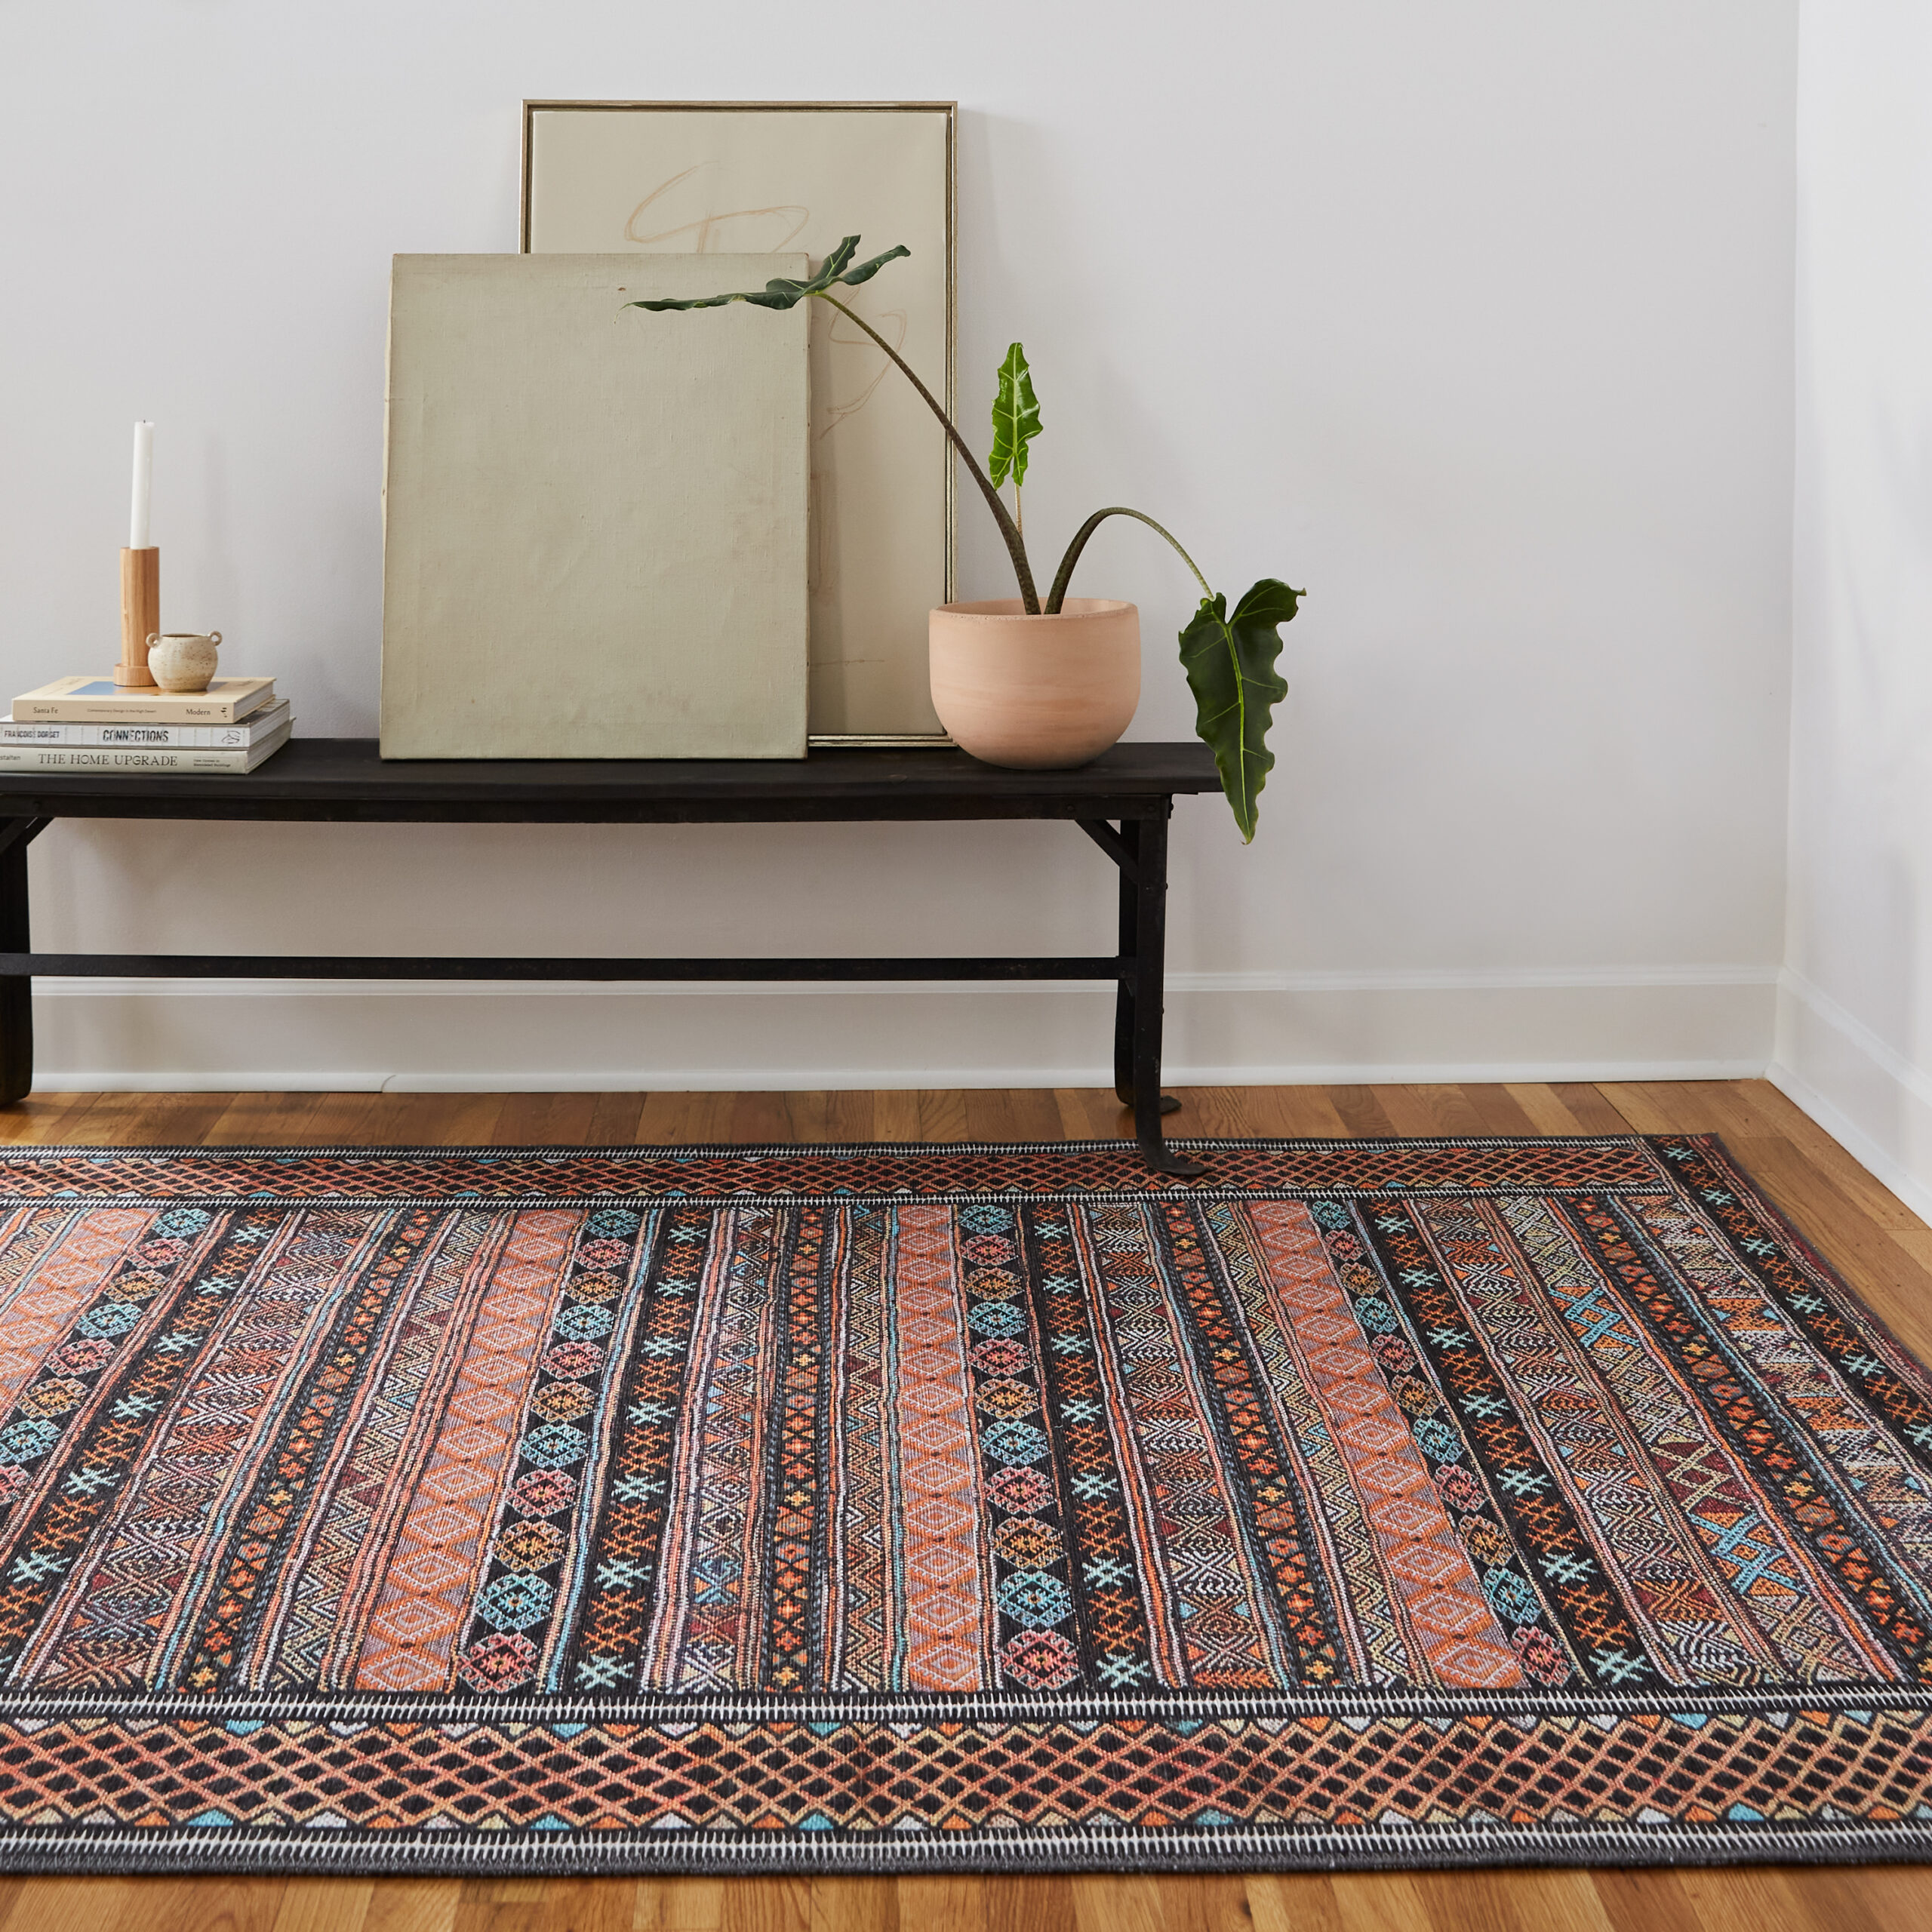 A patterned vintage-inspired rug in an entryway